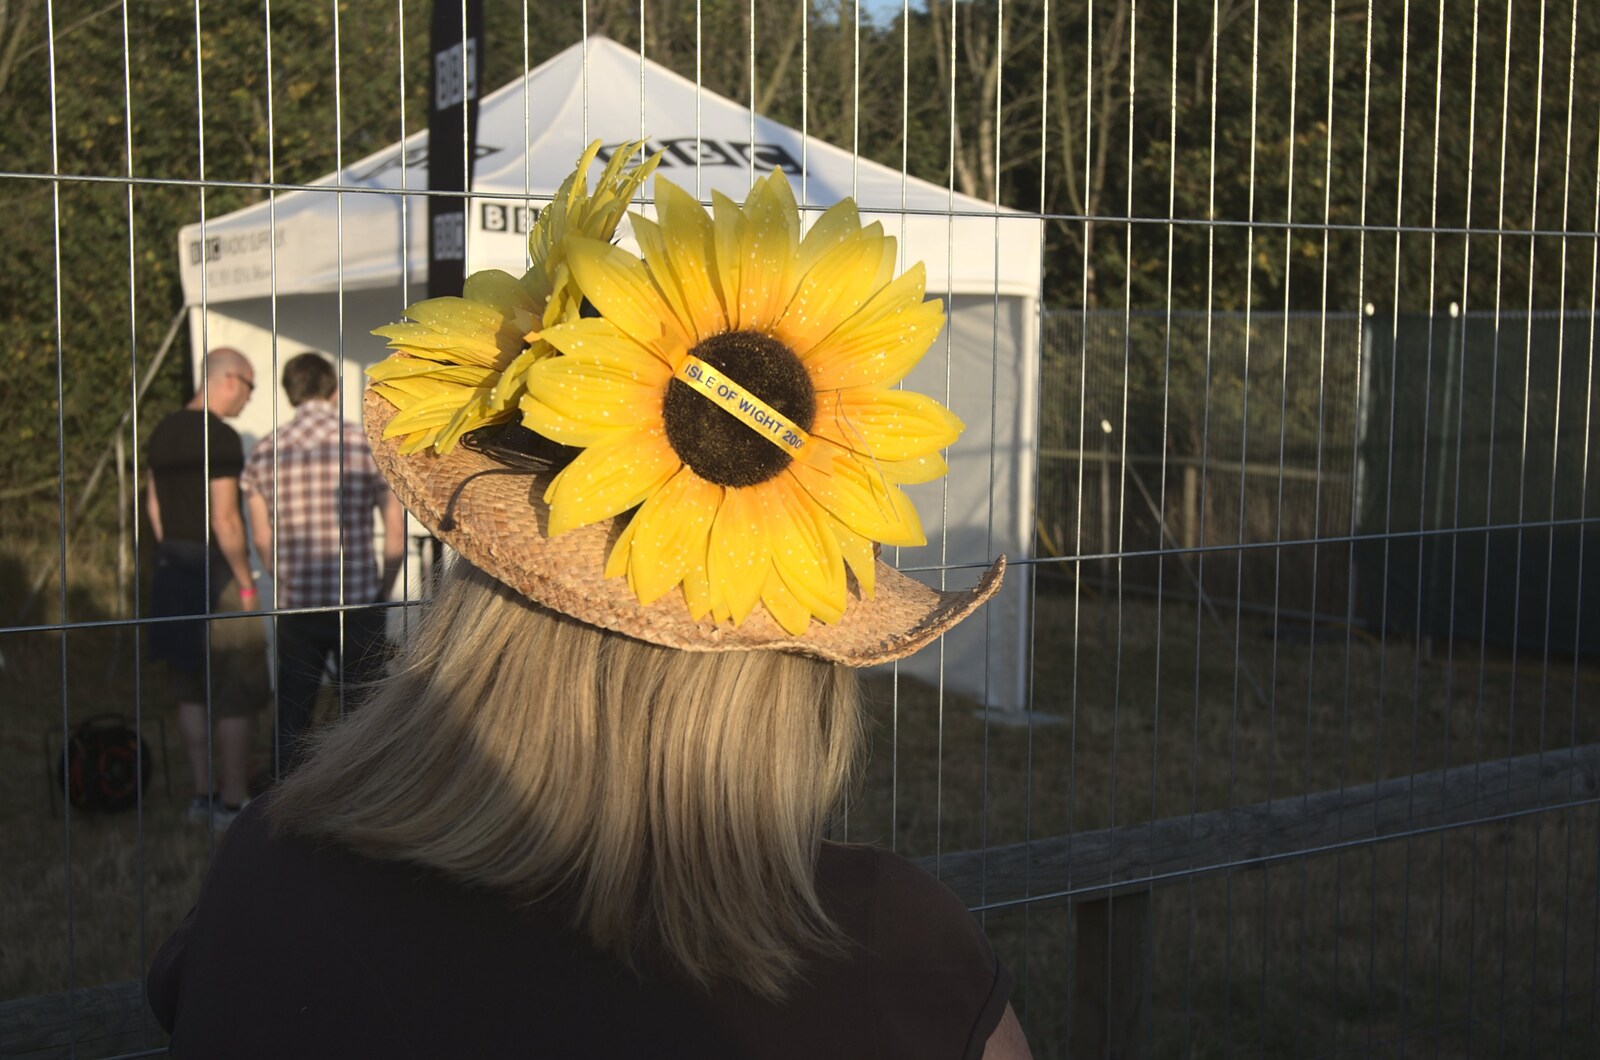 A sunflower hat from Harvest Festival at Jimmy's Farm, Wherstead, Suffolk - 12th September 2009